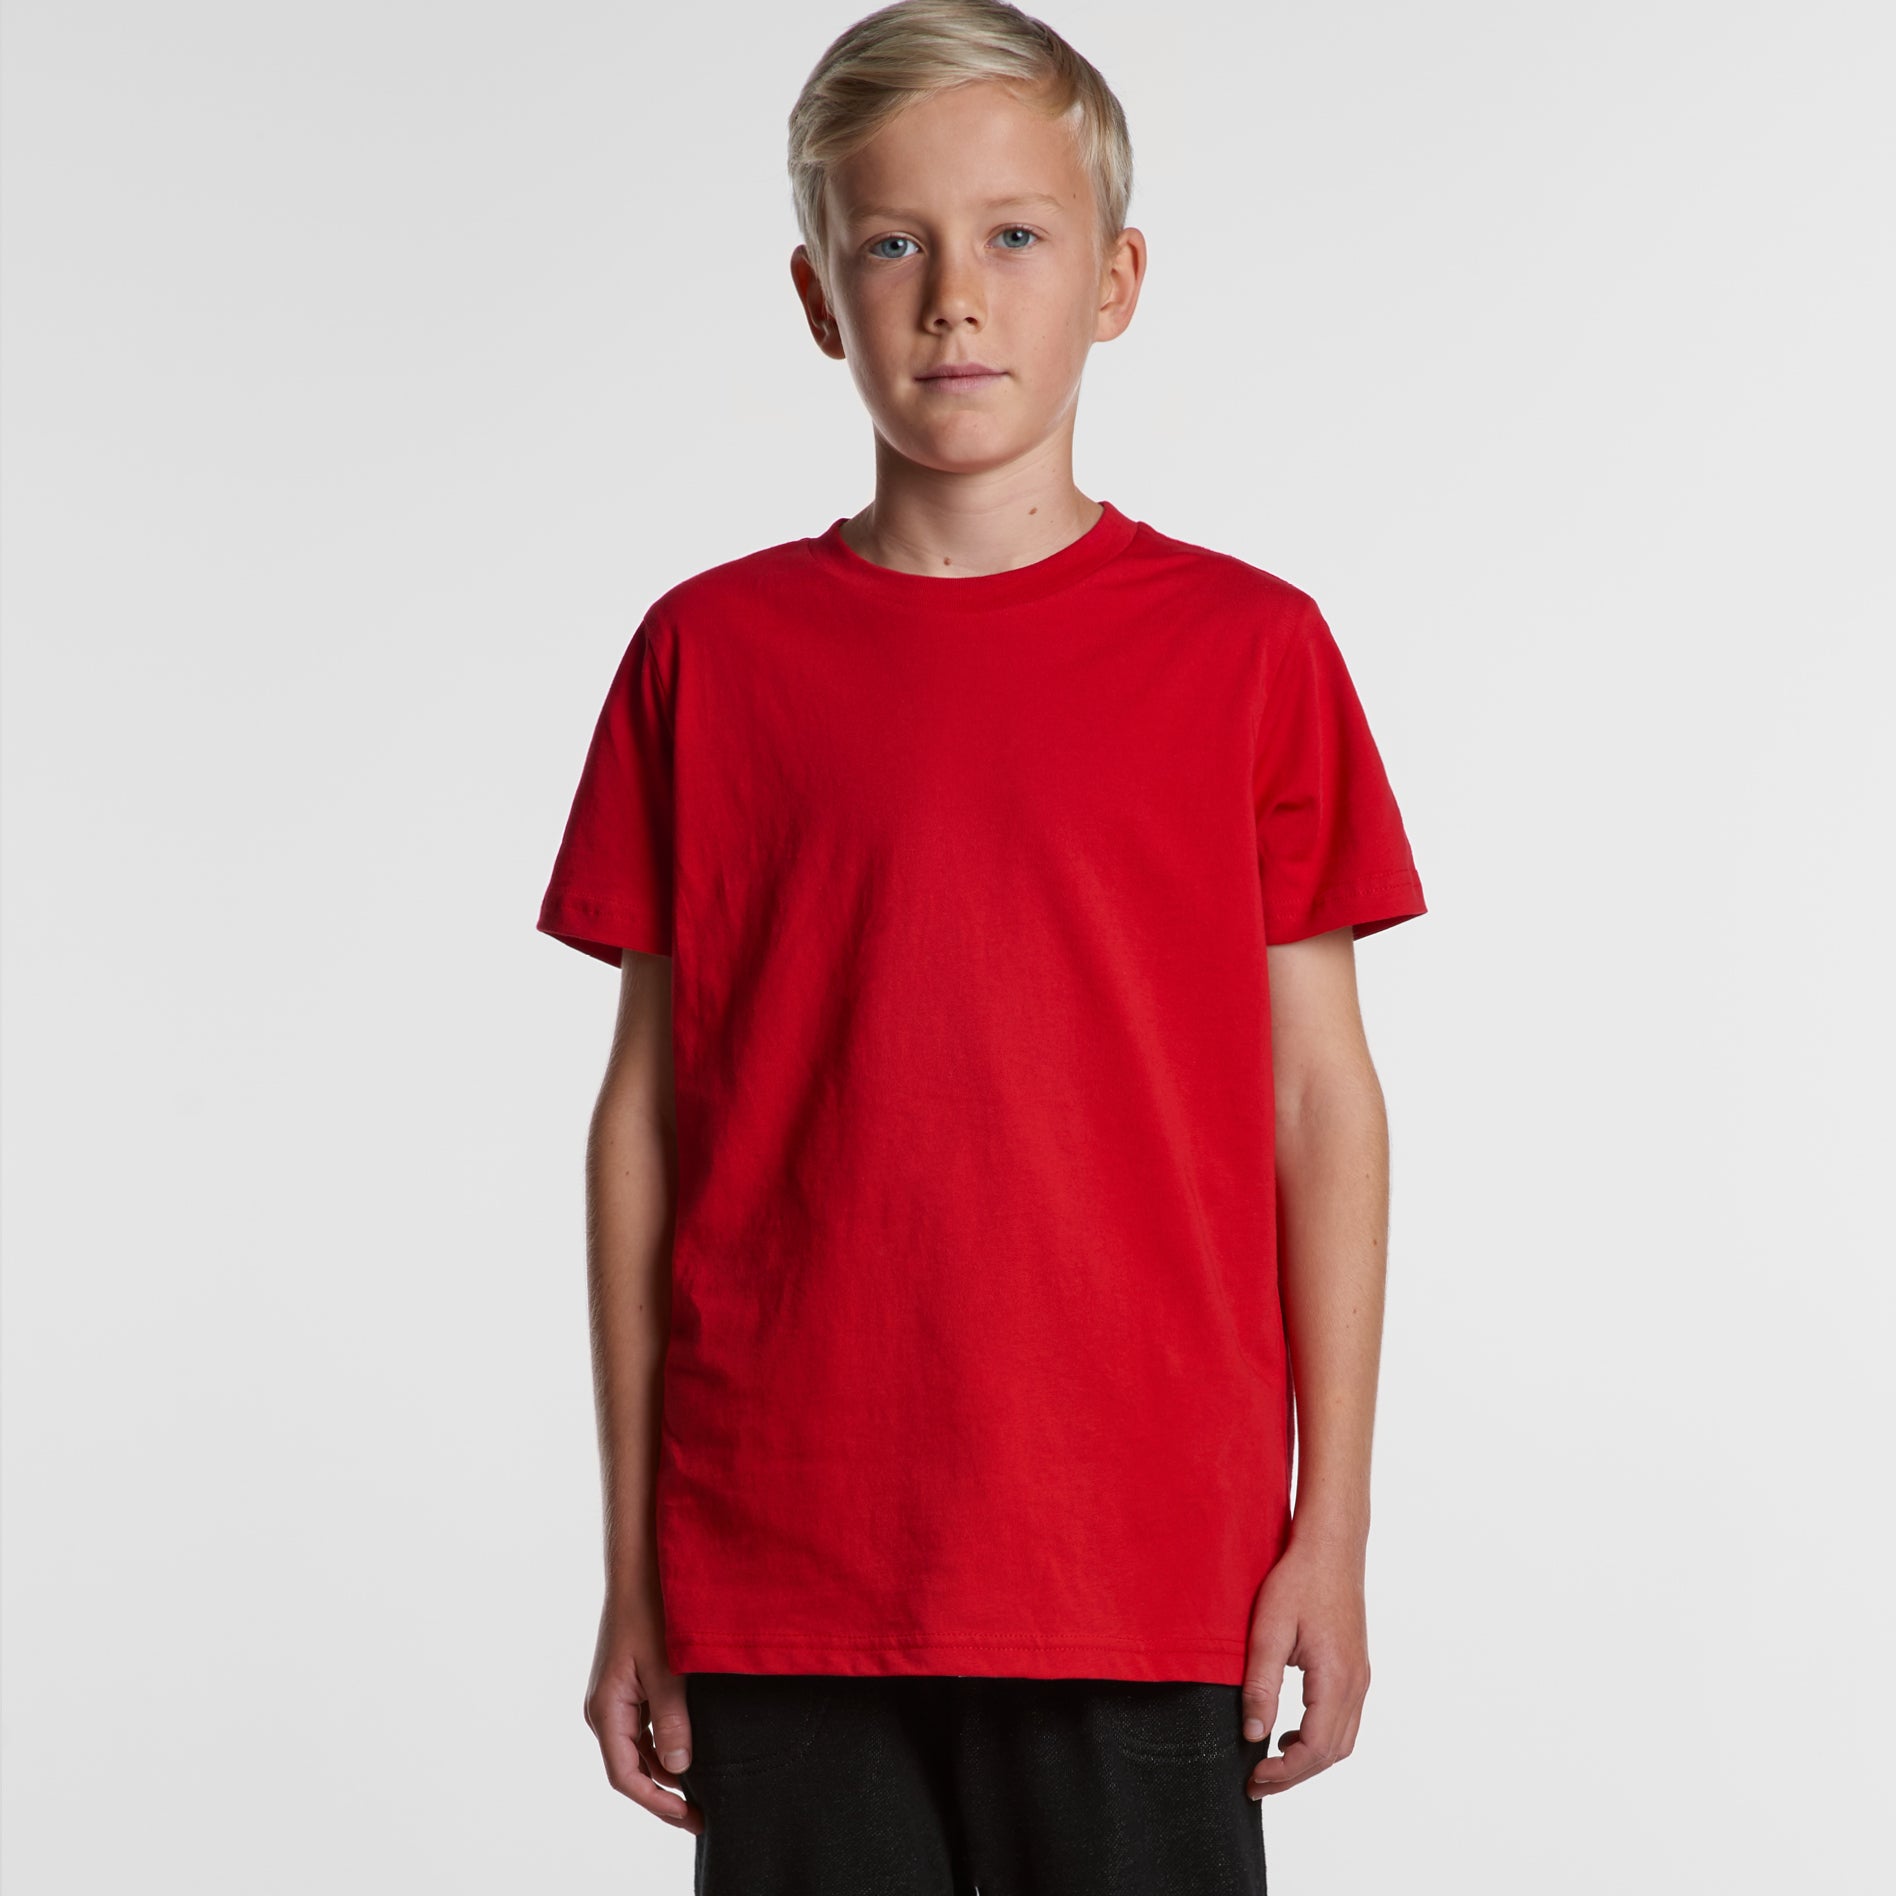 AS Colour Youth Tee(SCT-22A)